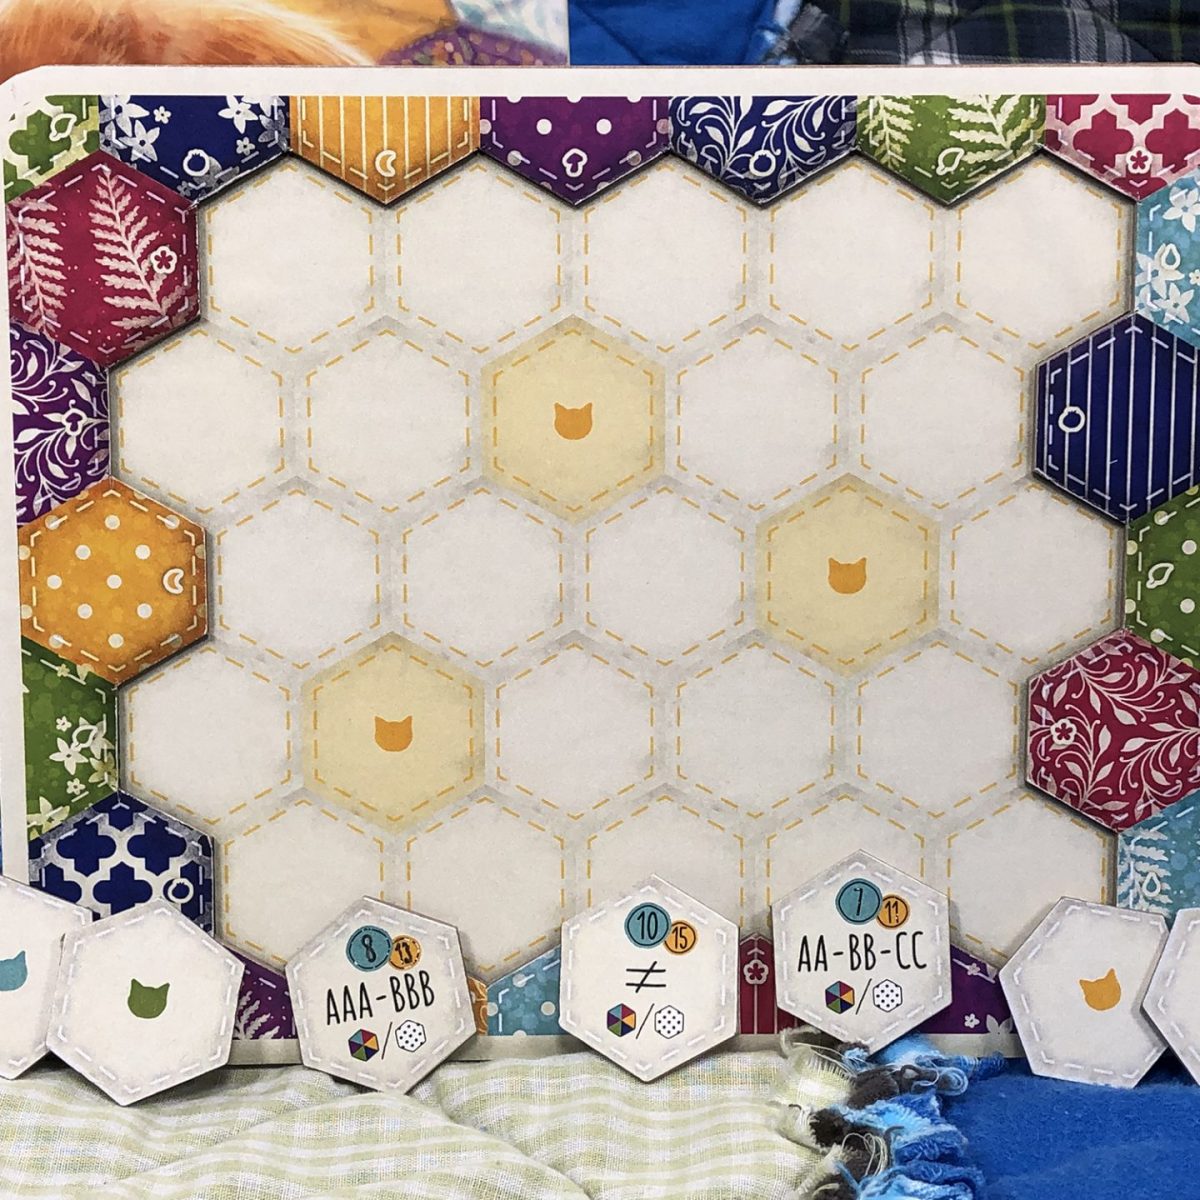 Buy Calico Board Game, Award Winning Strategy Game, Sew Your Quilt to Score  Points, Family Fun, Easy to Learn, Solo Play, Ages 8+, 1-4 Players, 30-45  Min, Flatout Games, Alderac Entertainment Group (